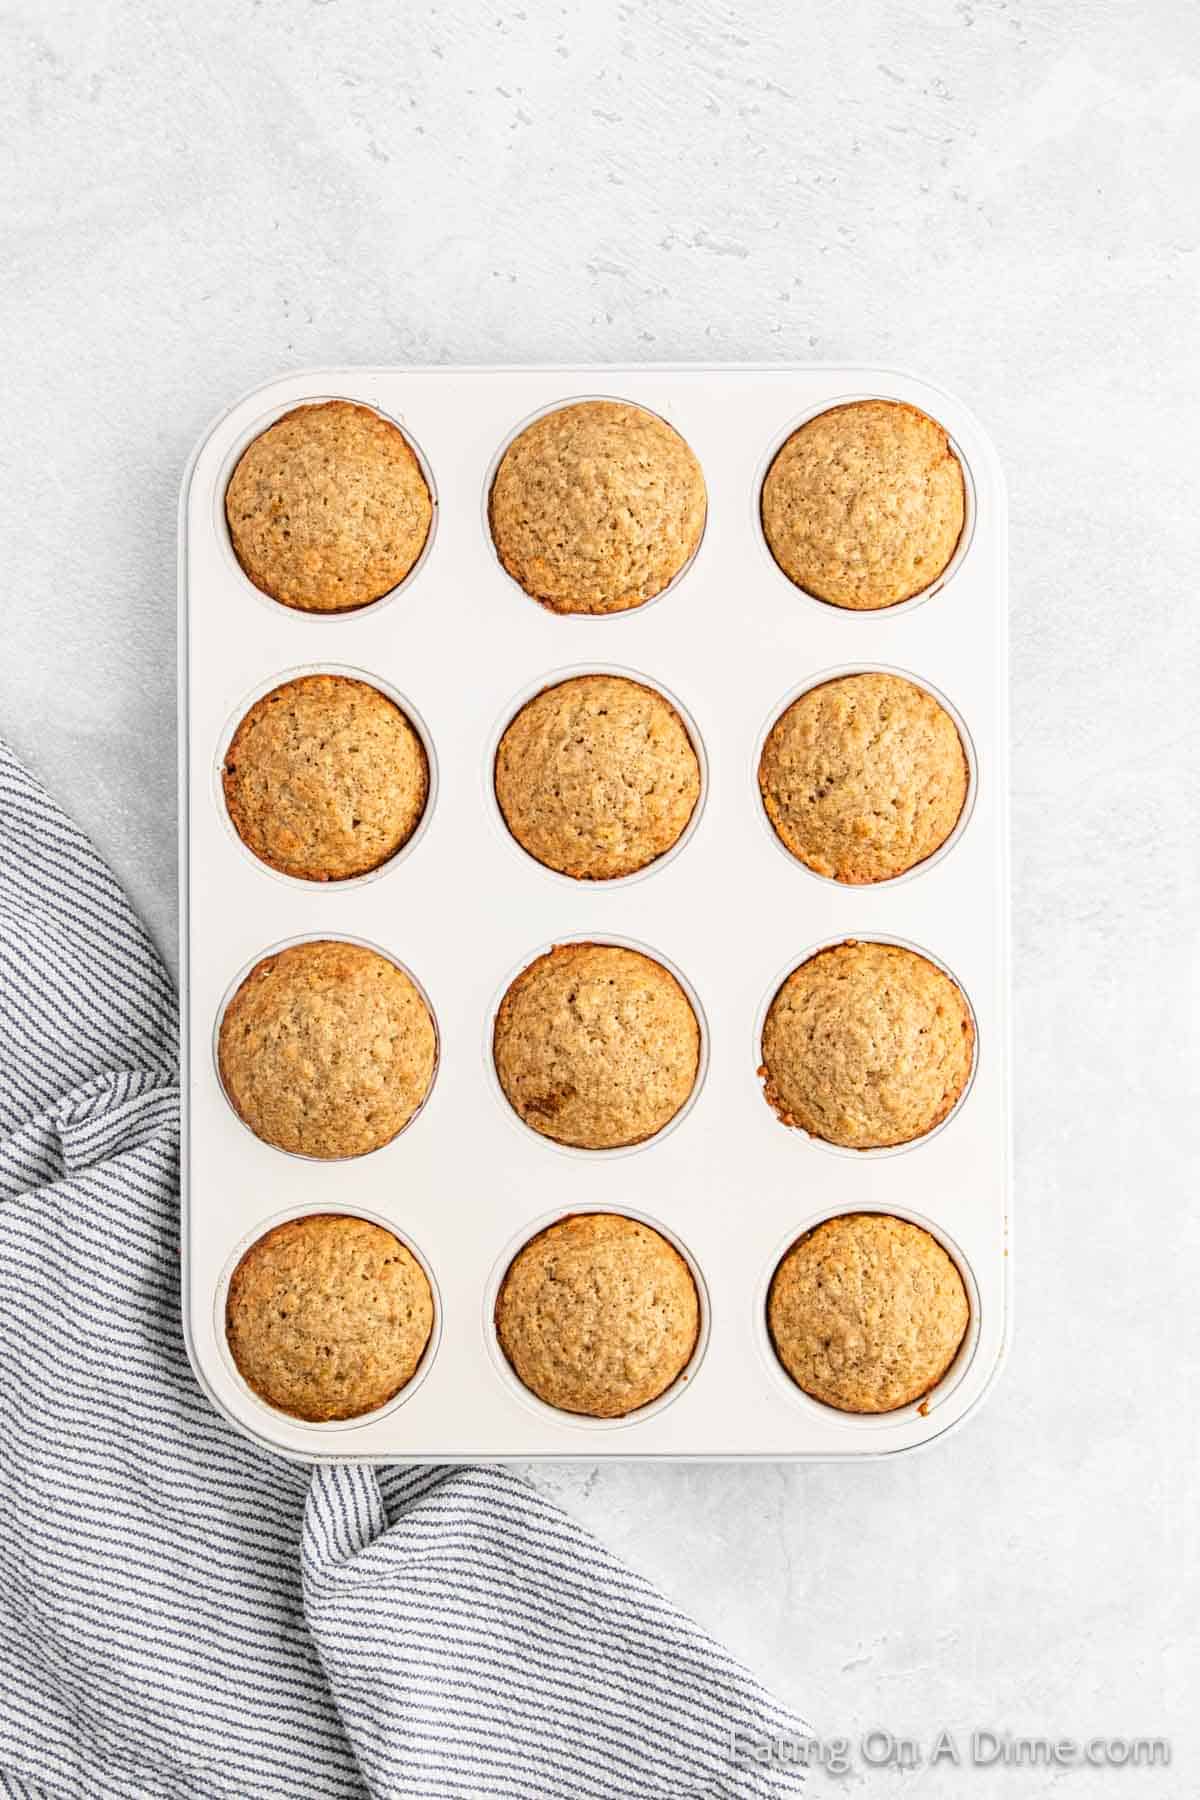 Baked Snickerdoodle Muffins in a muffin pan